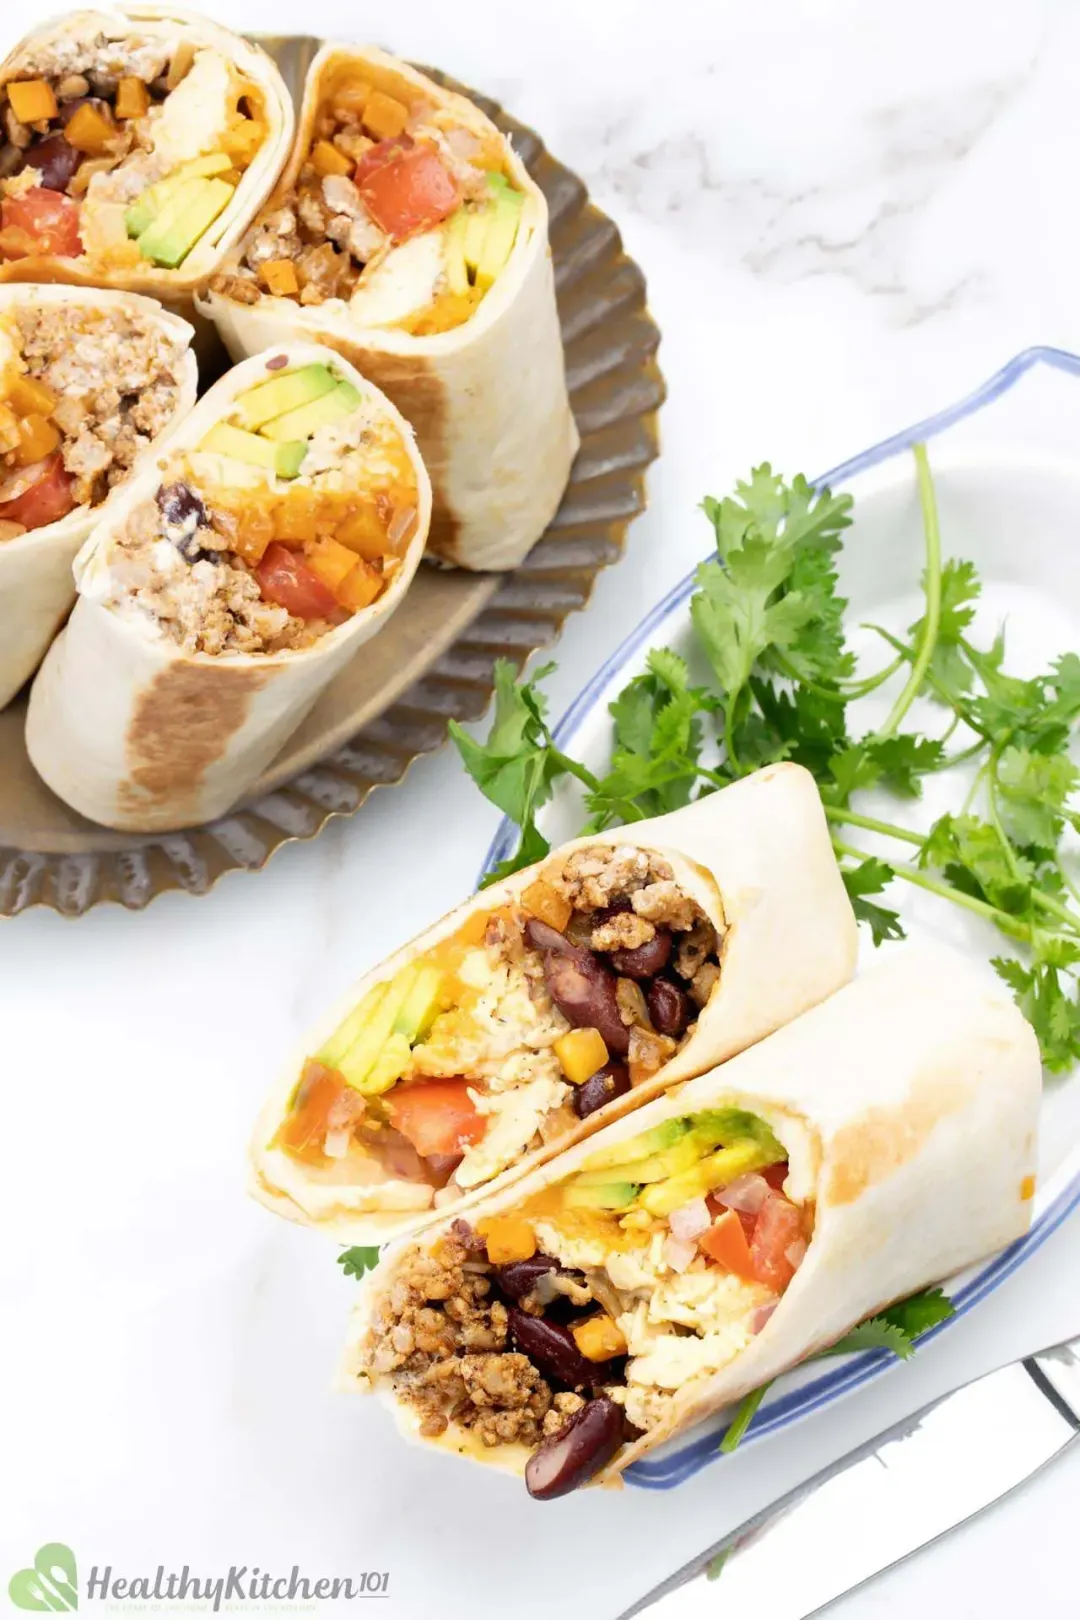 Cut-up rolls of burrito, filled with beans, ground meat, and colorful vegetables on plates with cilantro sprigs